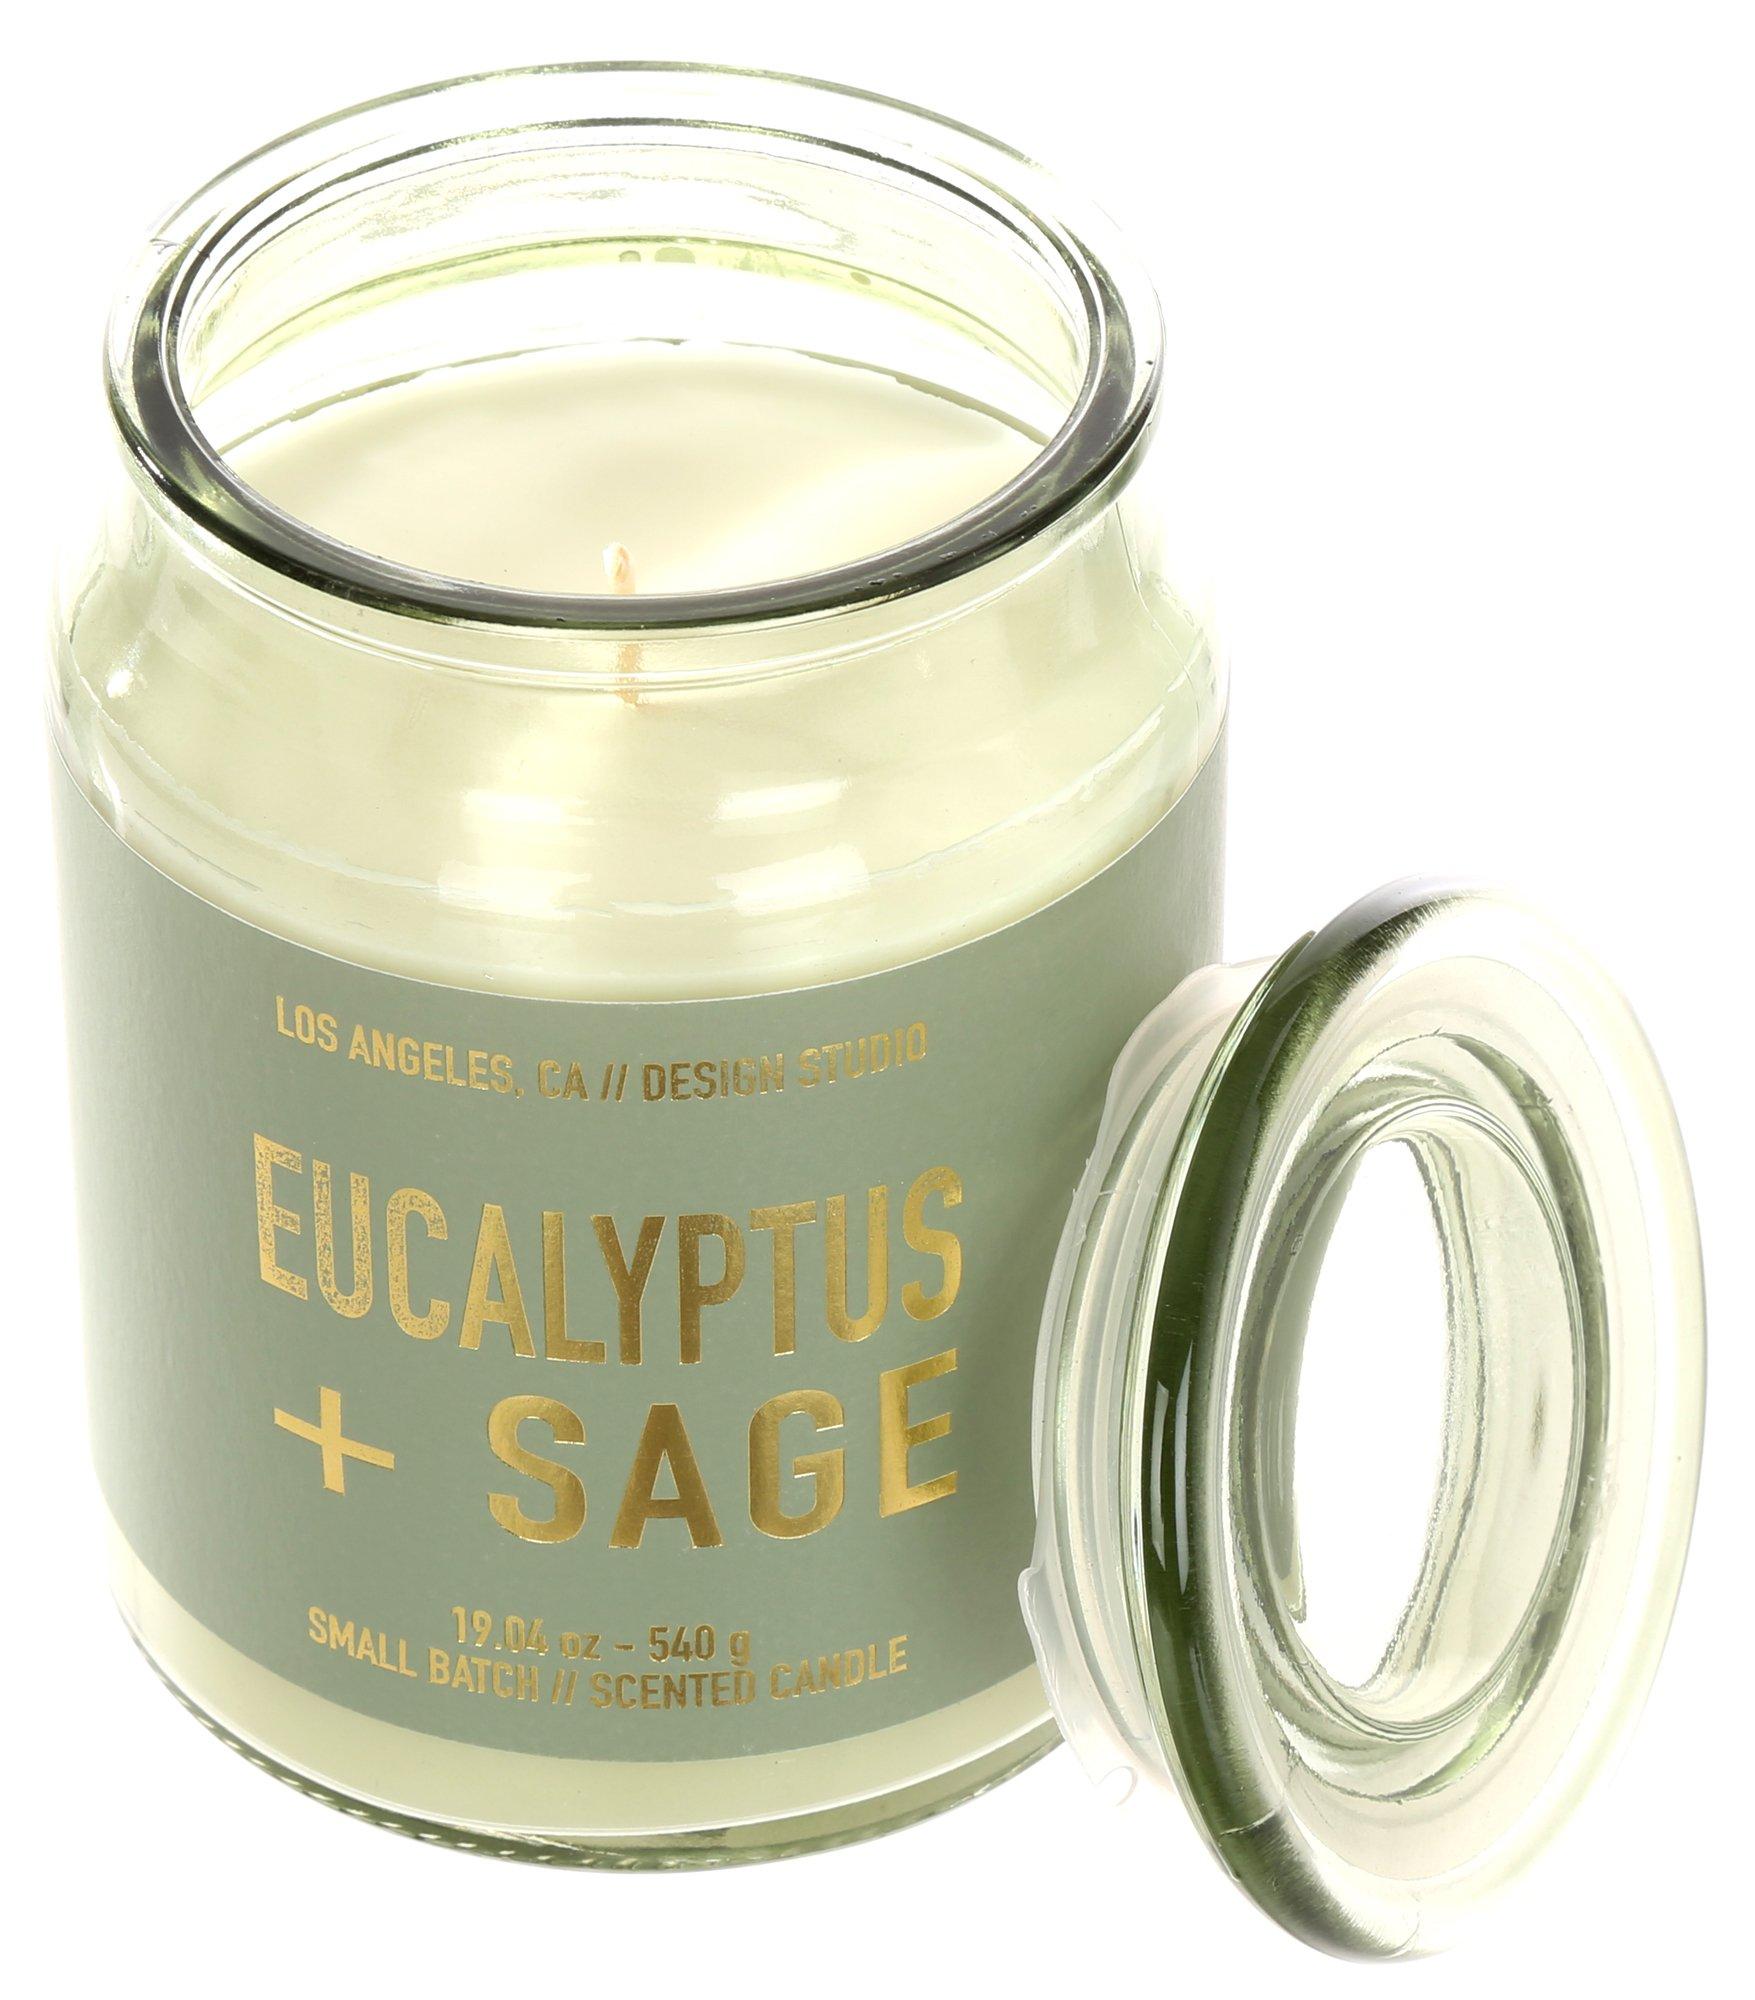 19 oz Eucalyptus and Sage Scented Candle